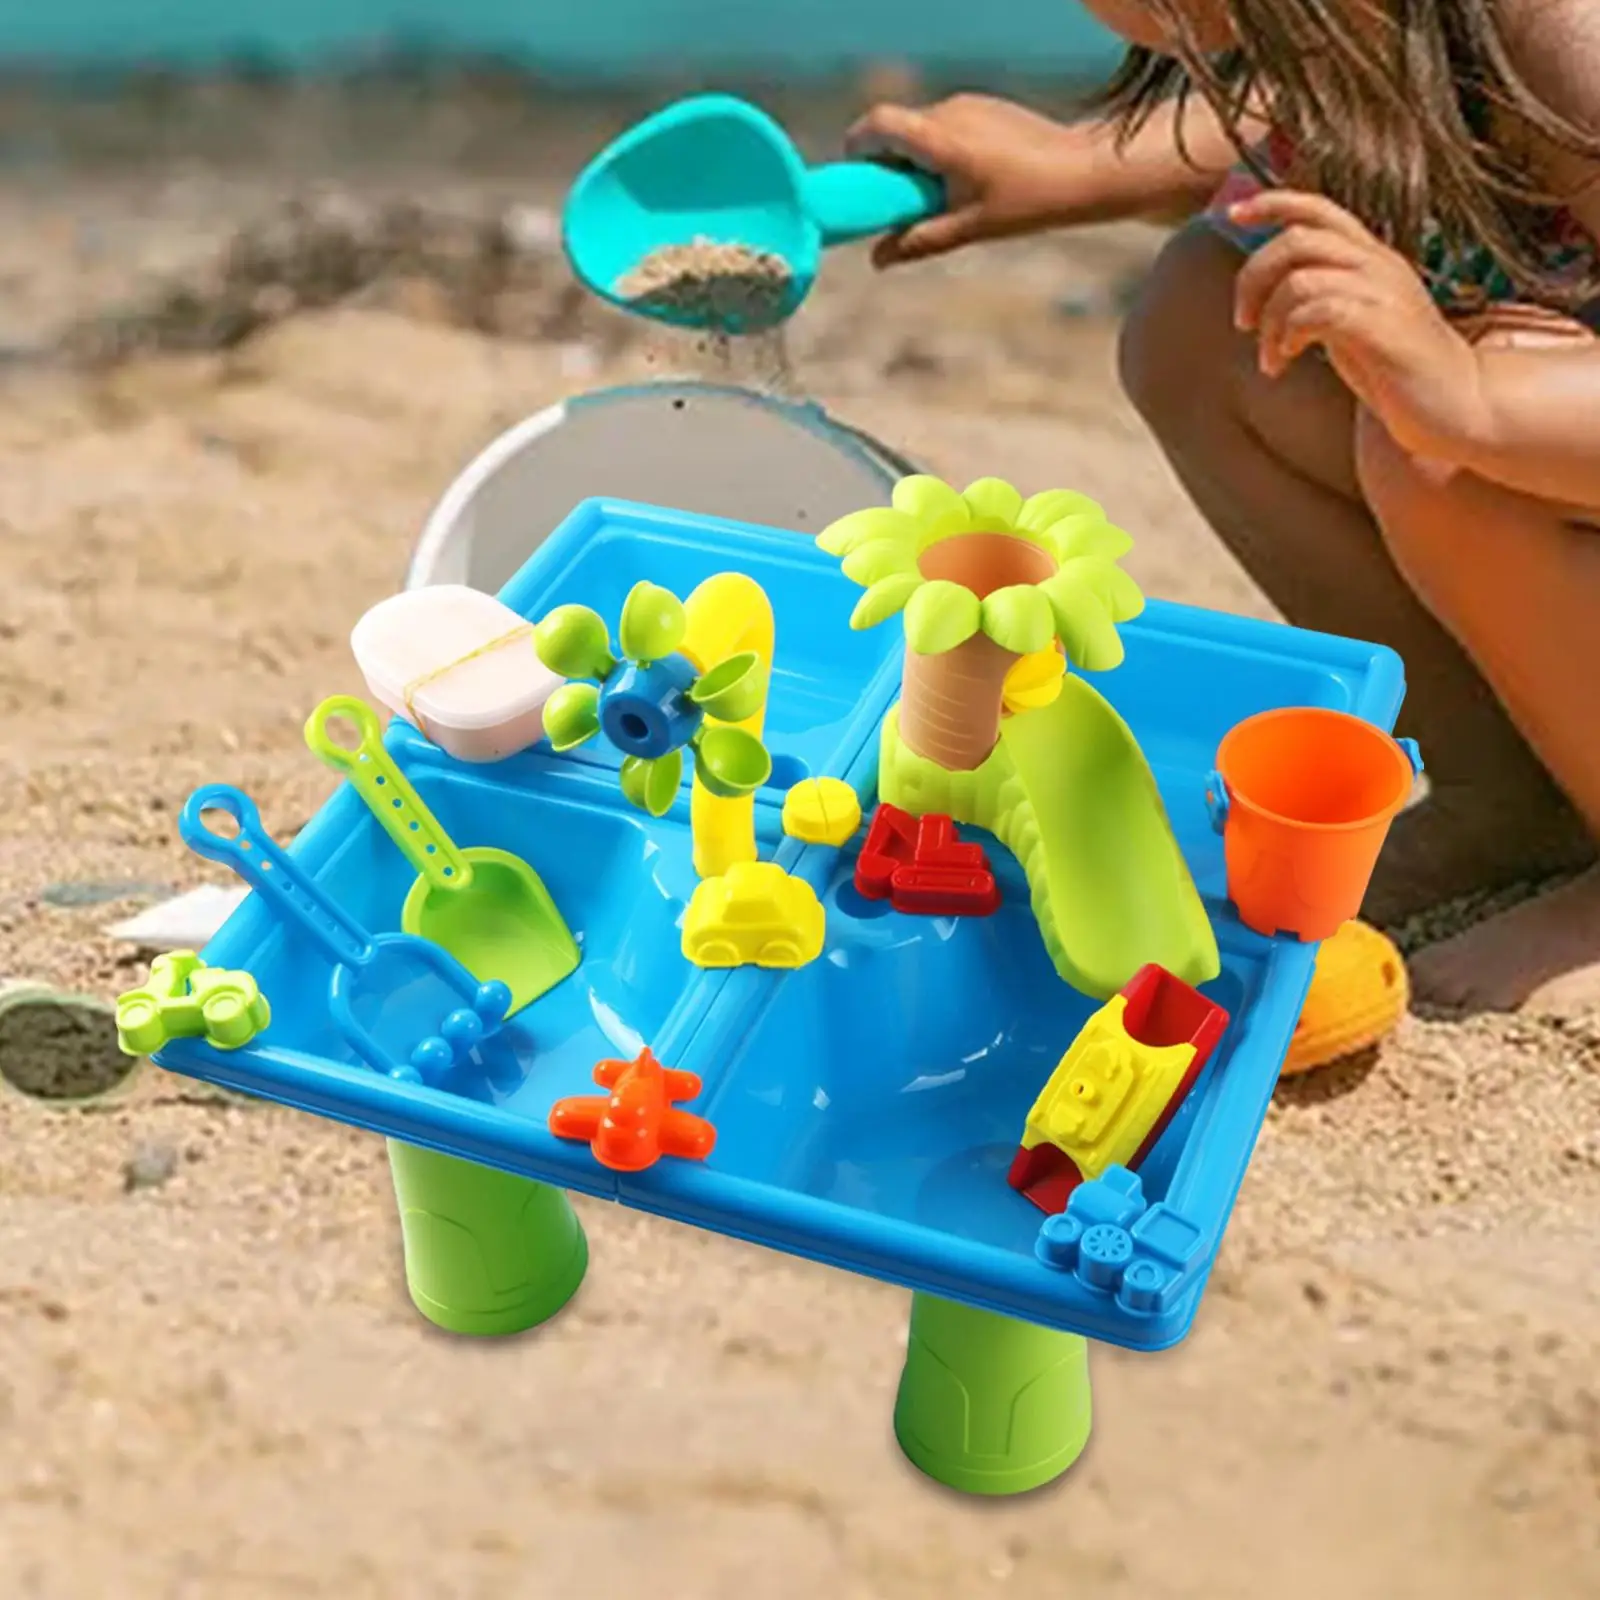 24Pcs Water Table Interactive Social Play Activity Beach Outdoor Outside Sandbox Table Playset for Kids Birthday Gifts